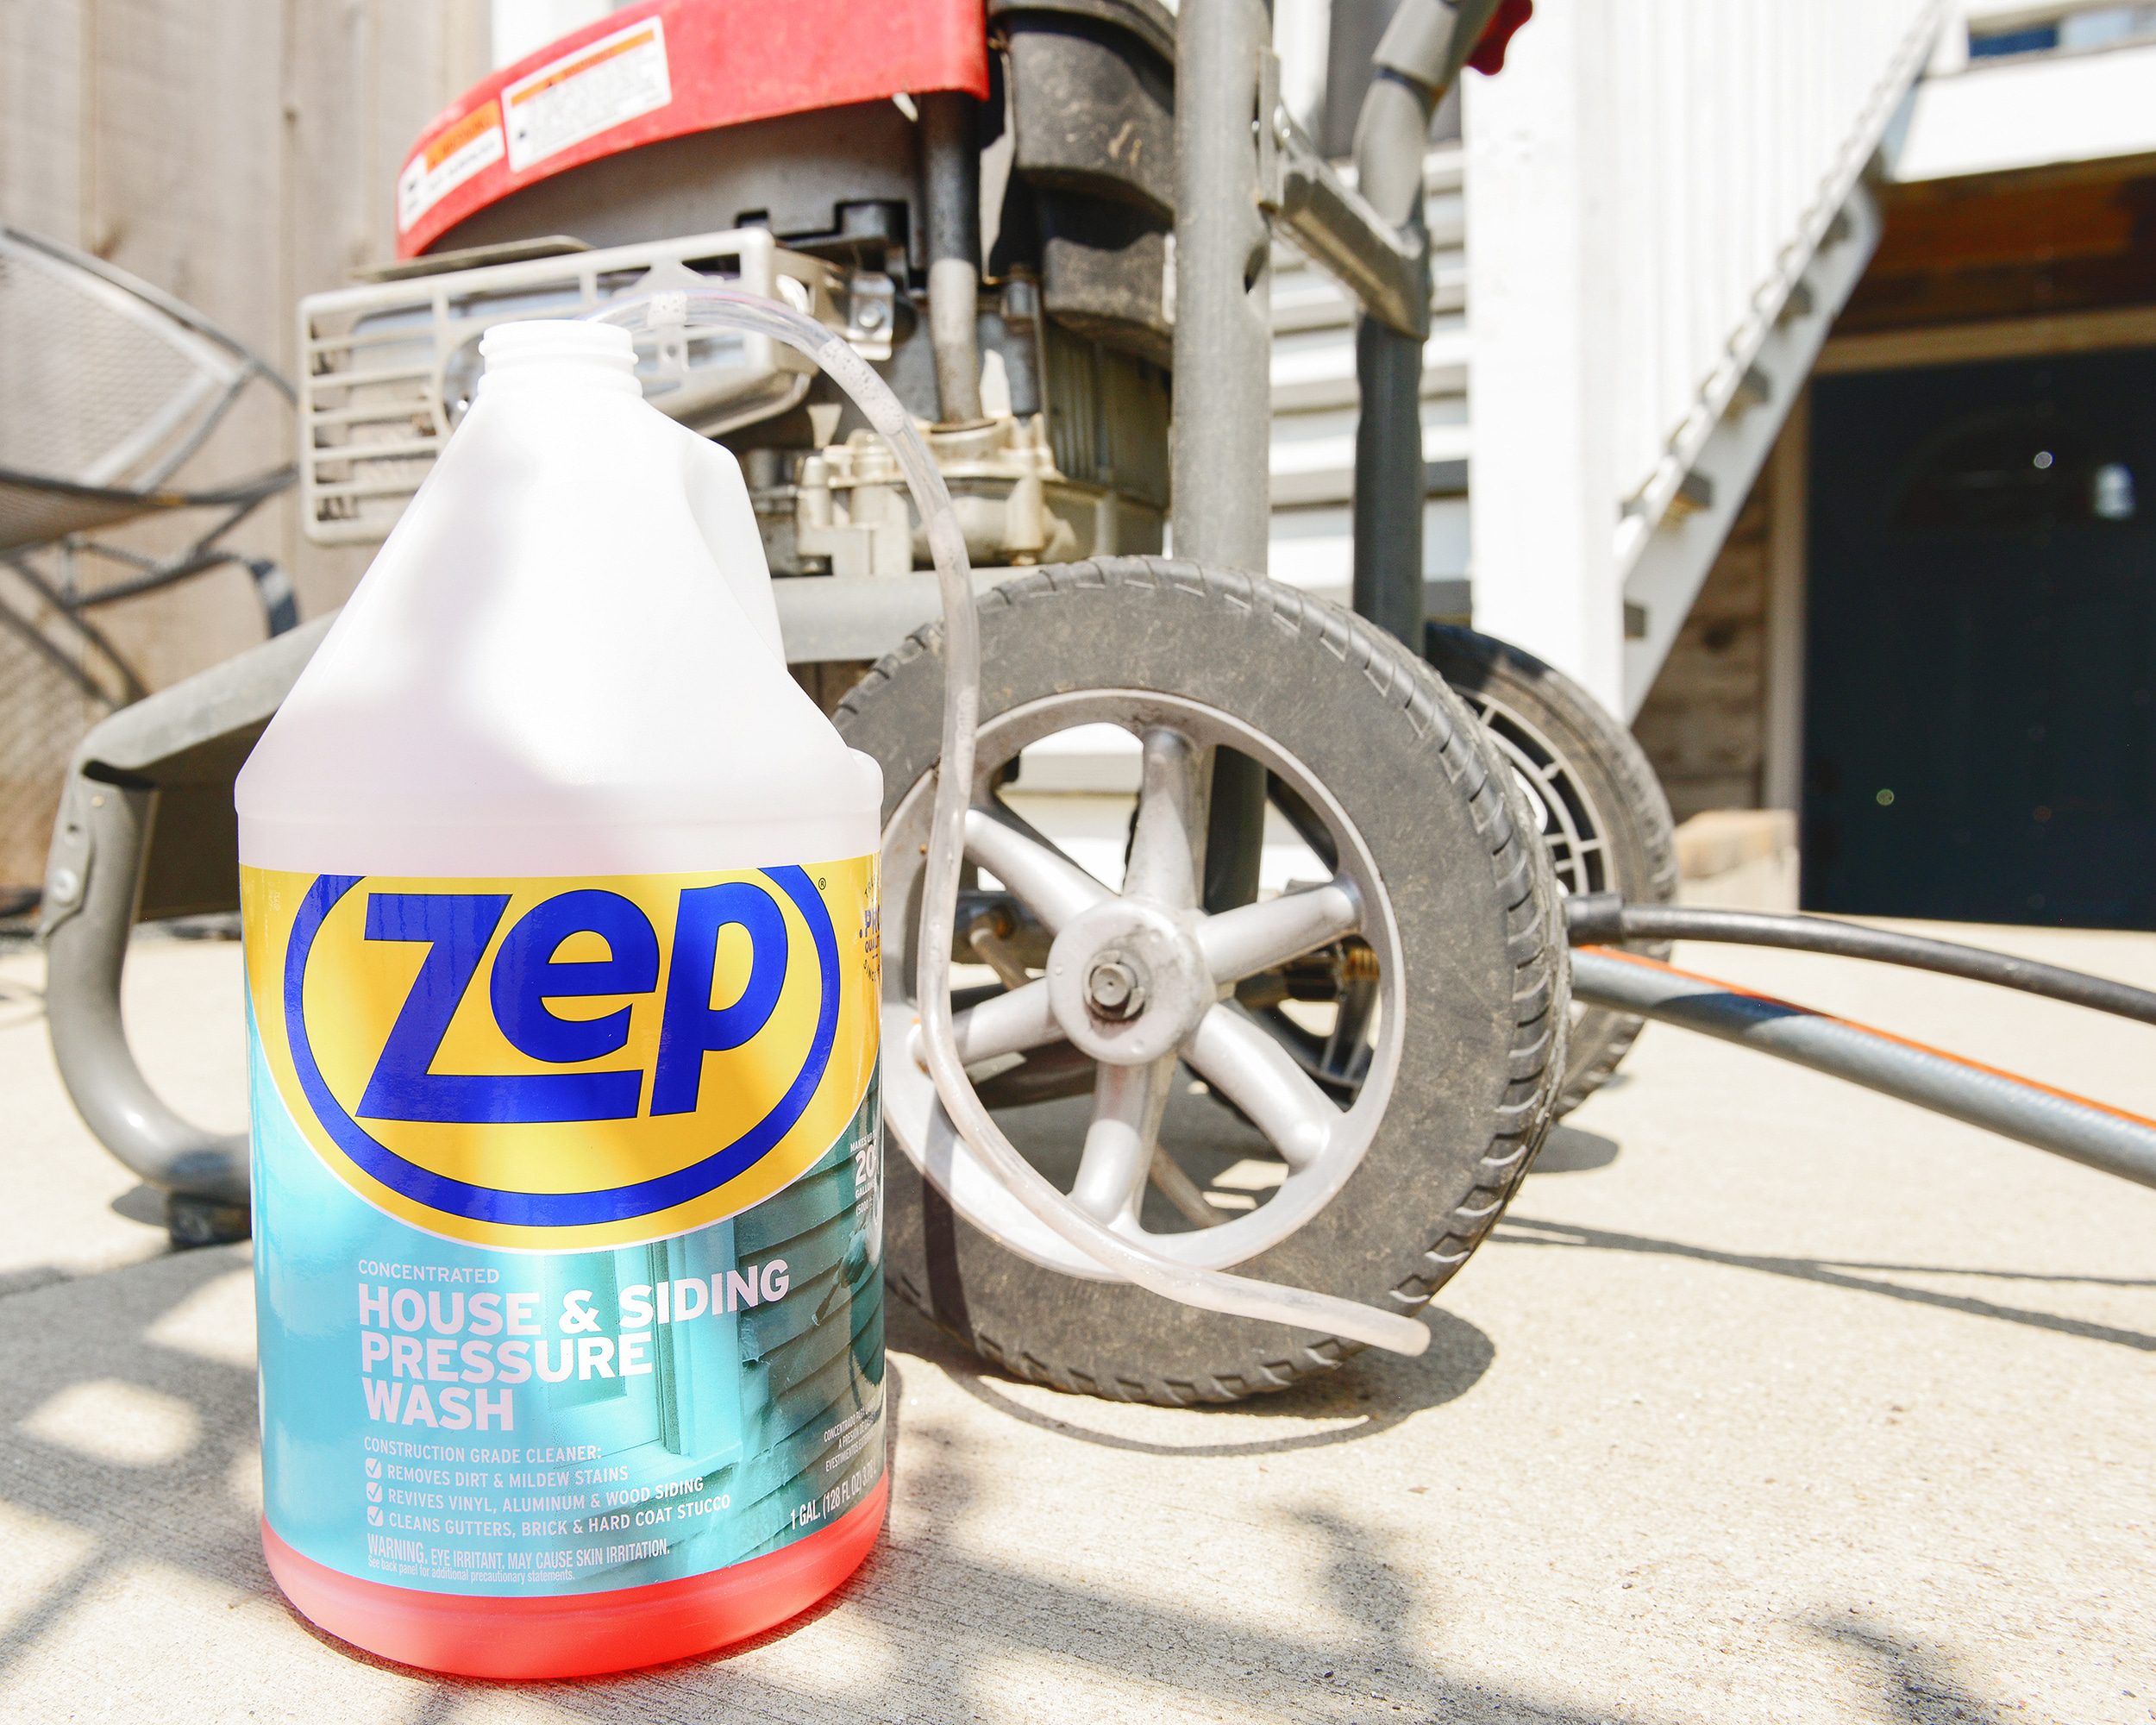 The power of pressure washing with the help of Zep! // Zep Driveway & Concrete Pressure Wash + Zep House & Siding Pressure Wash // via Yellow Brick Home #ZepLevelClean